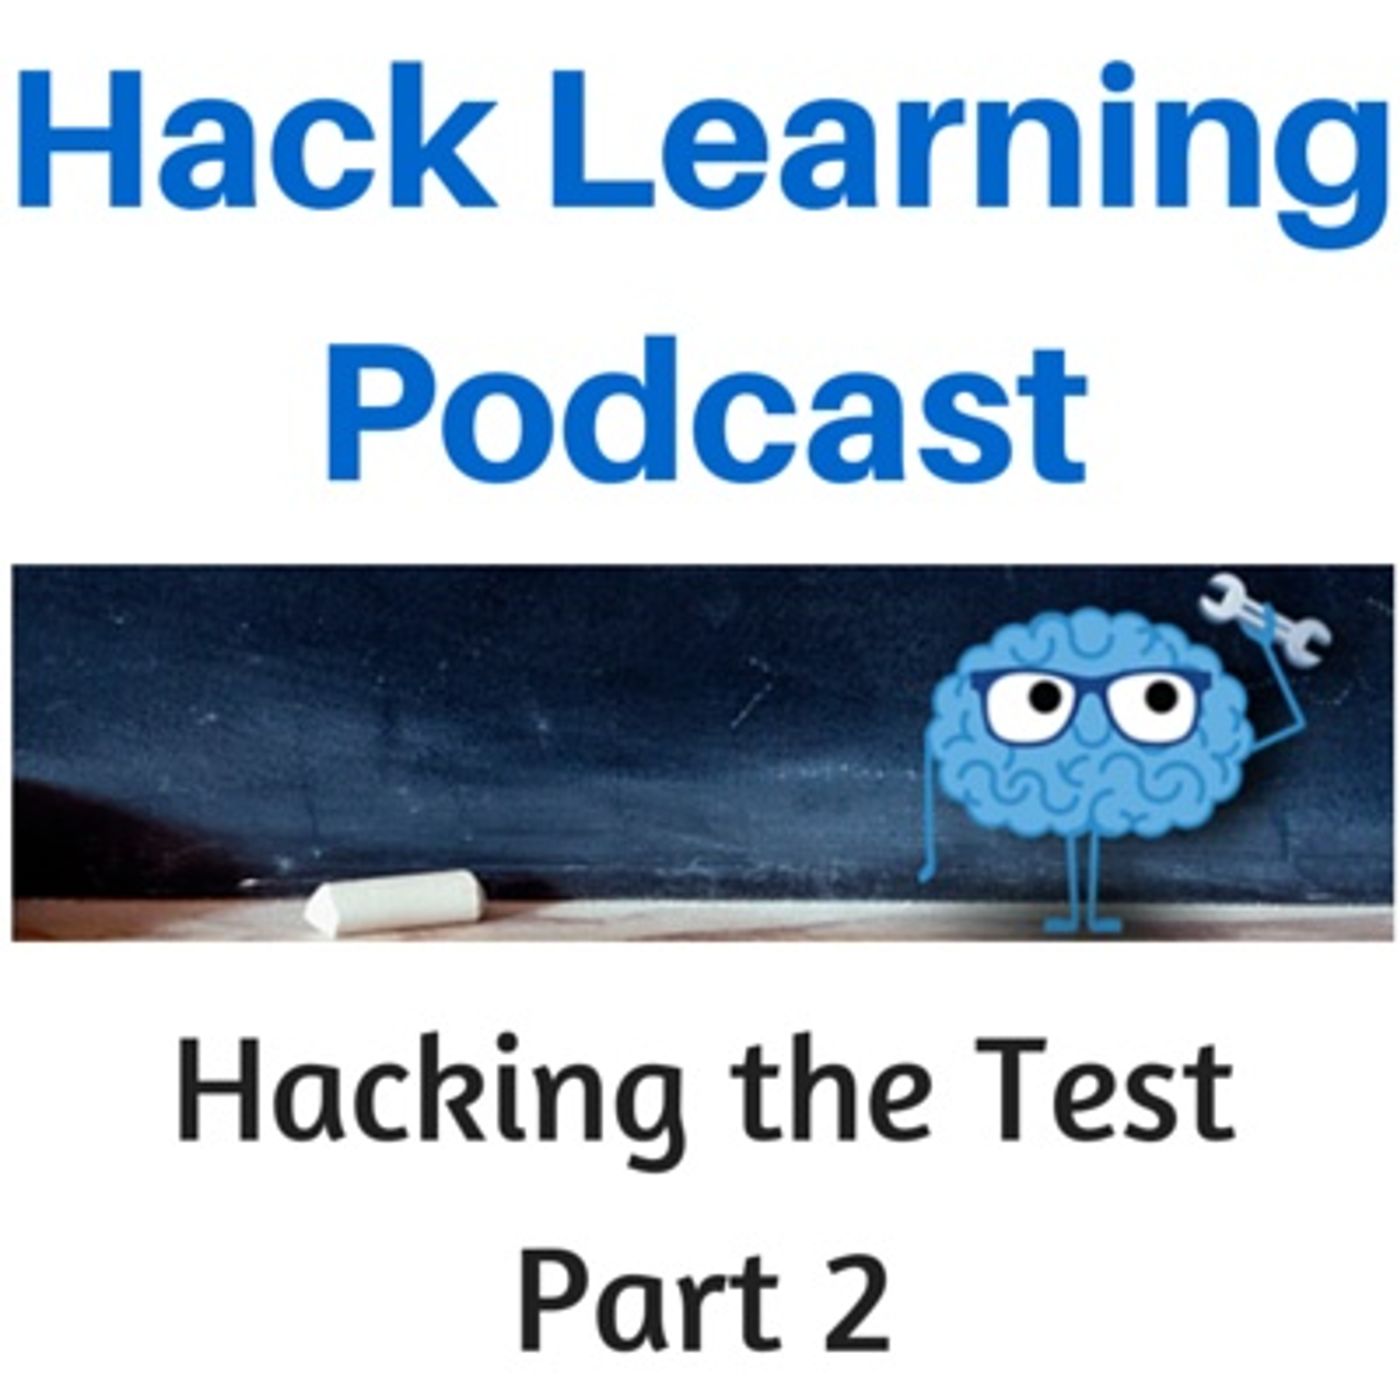 Hacking the Test (Part 2)